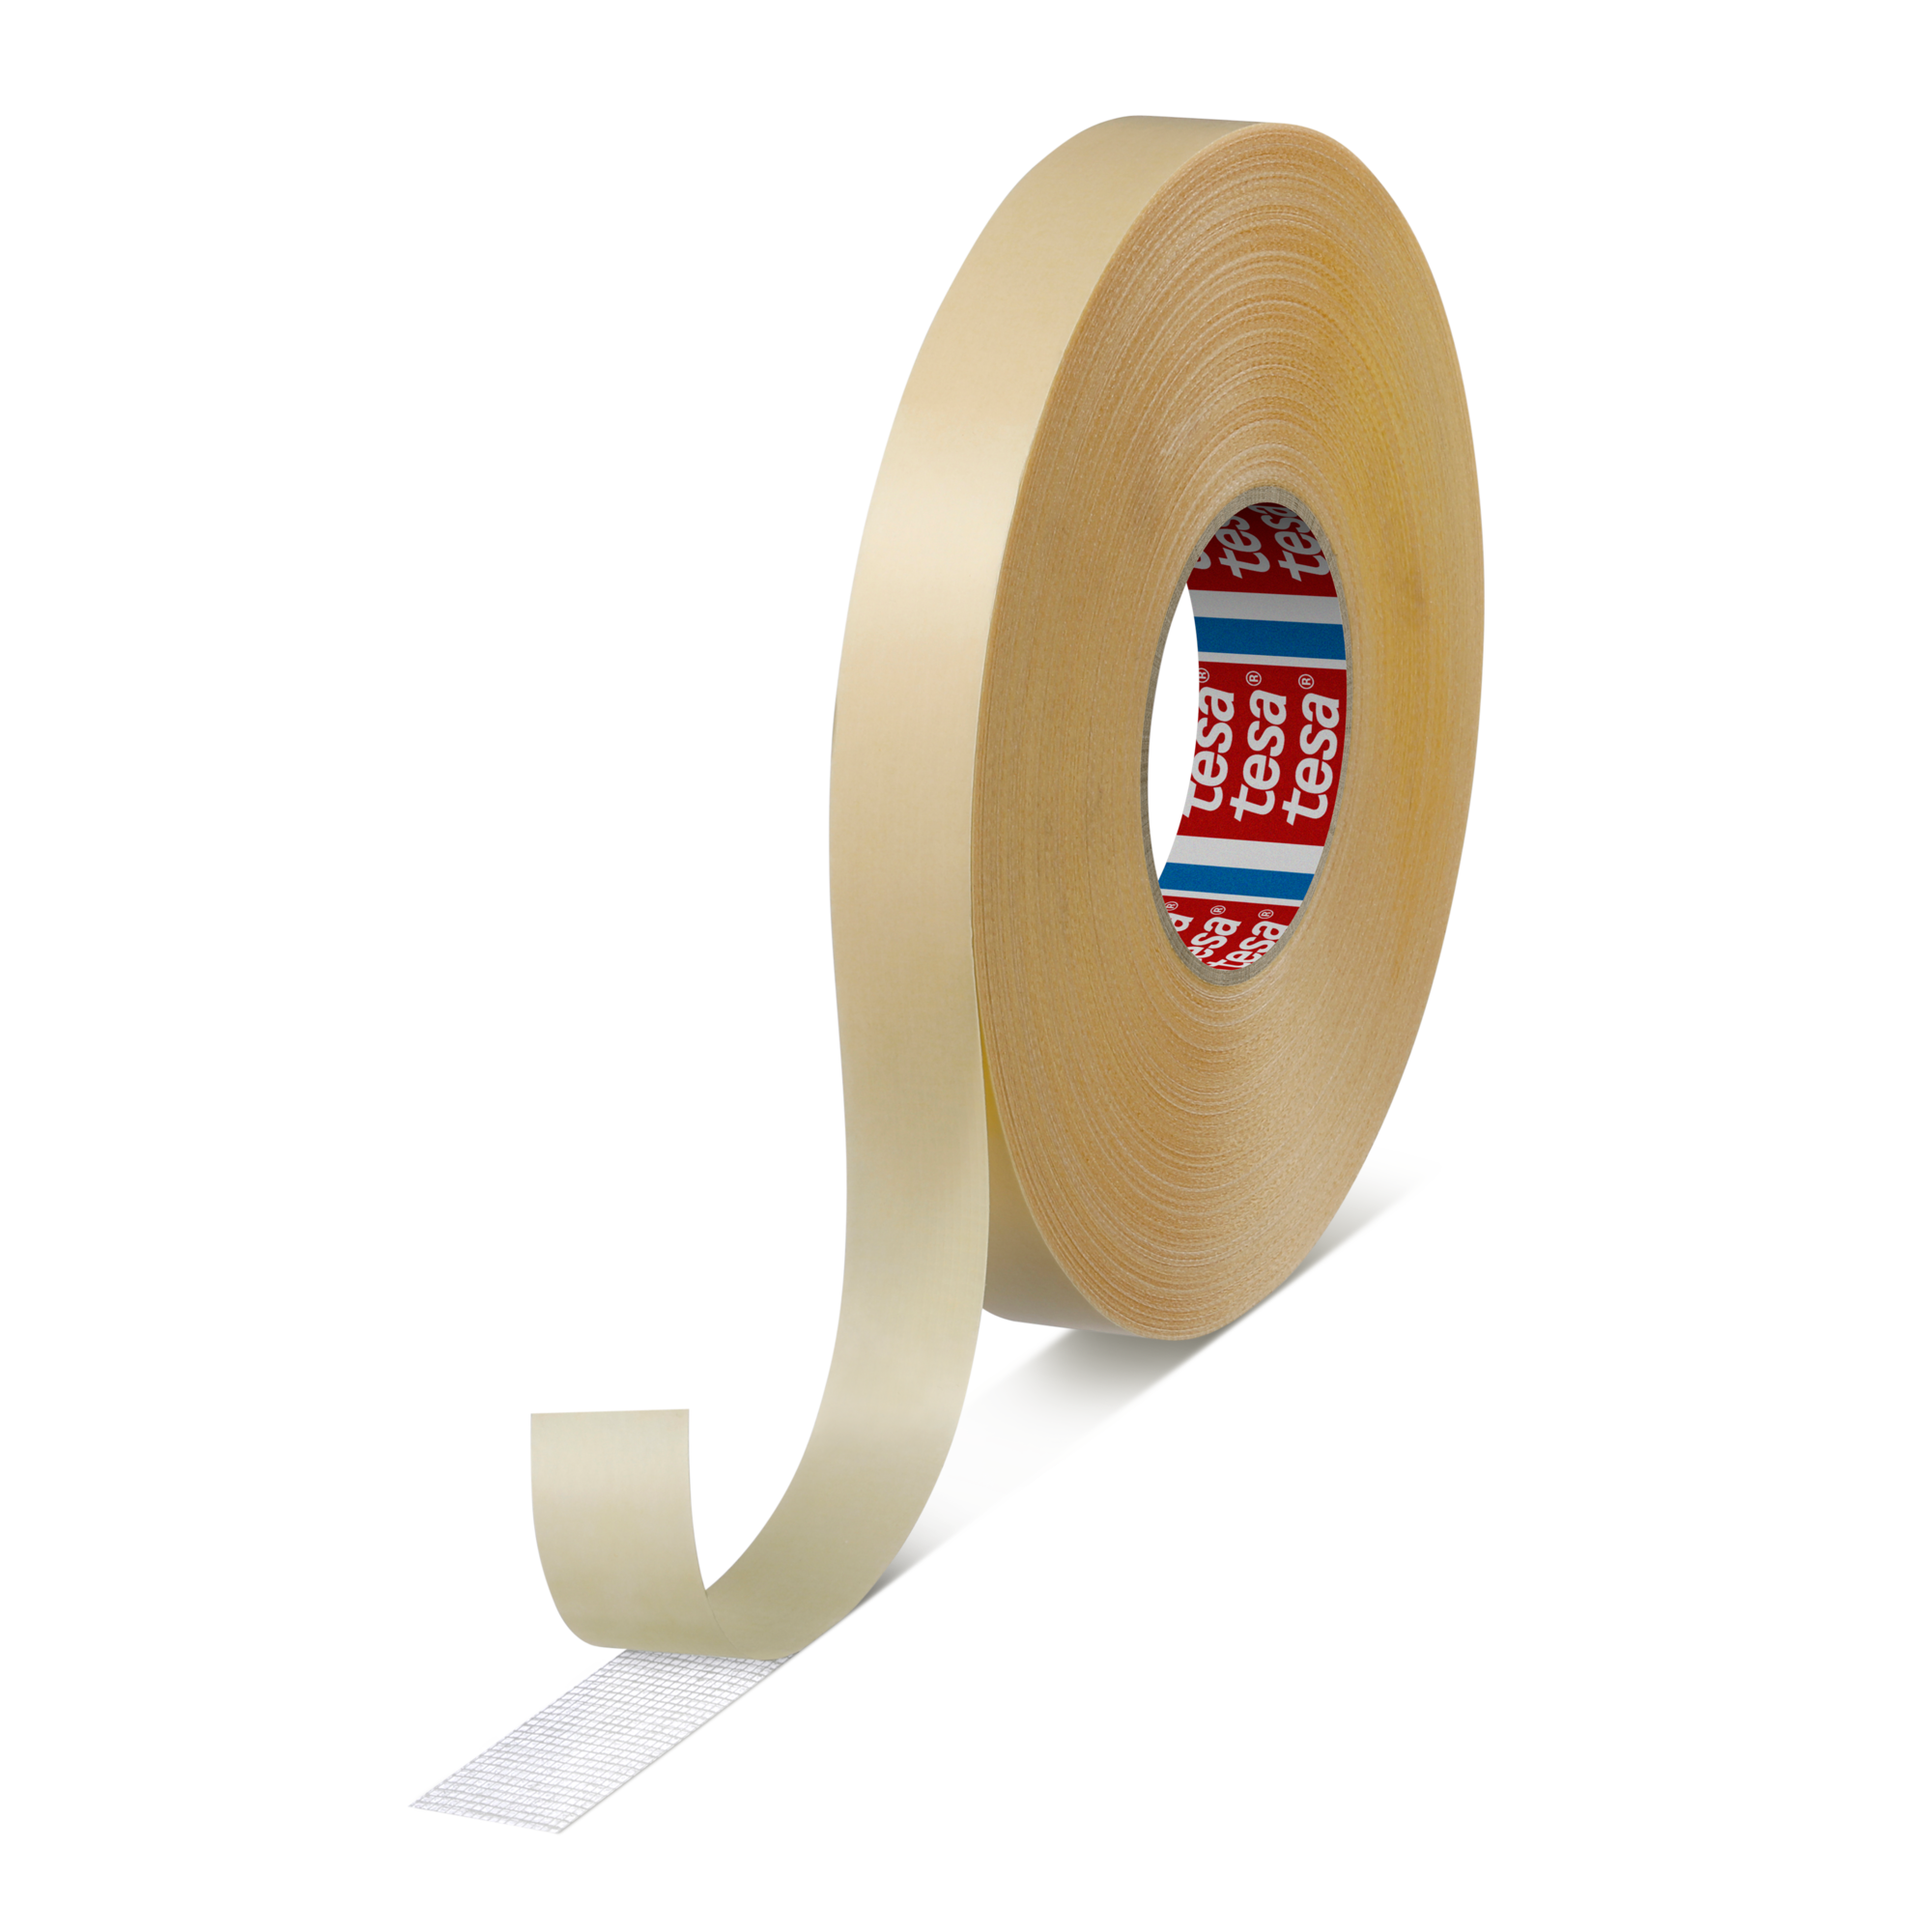 Tesa Tapes - Best Quality Adhesive Tapes Suppliers in UAE | Sabin Plastic